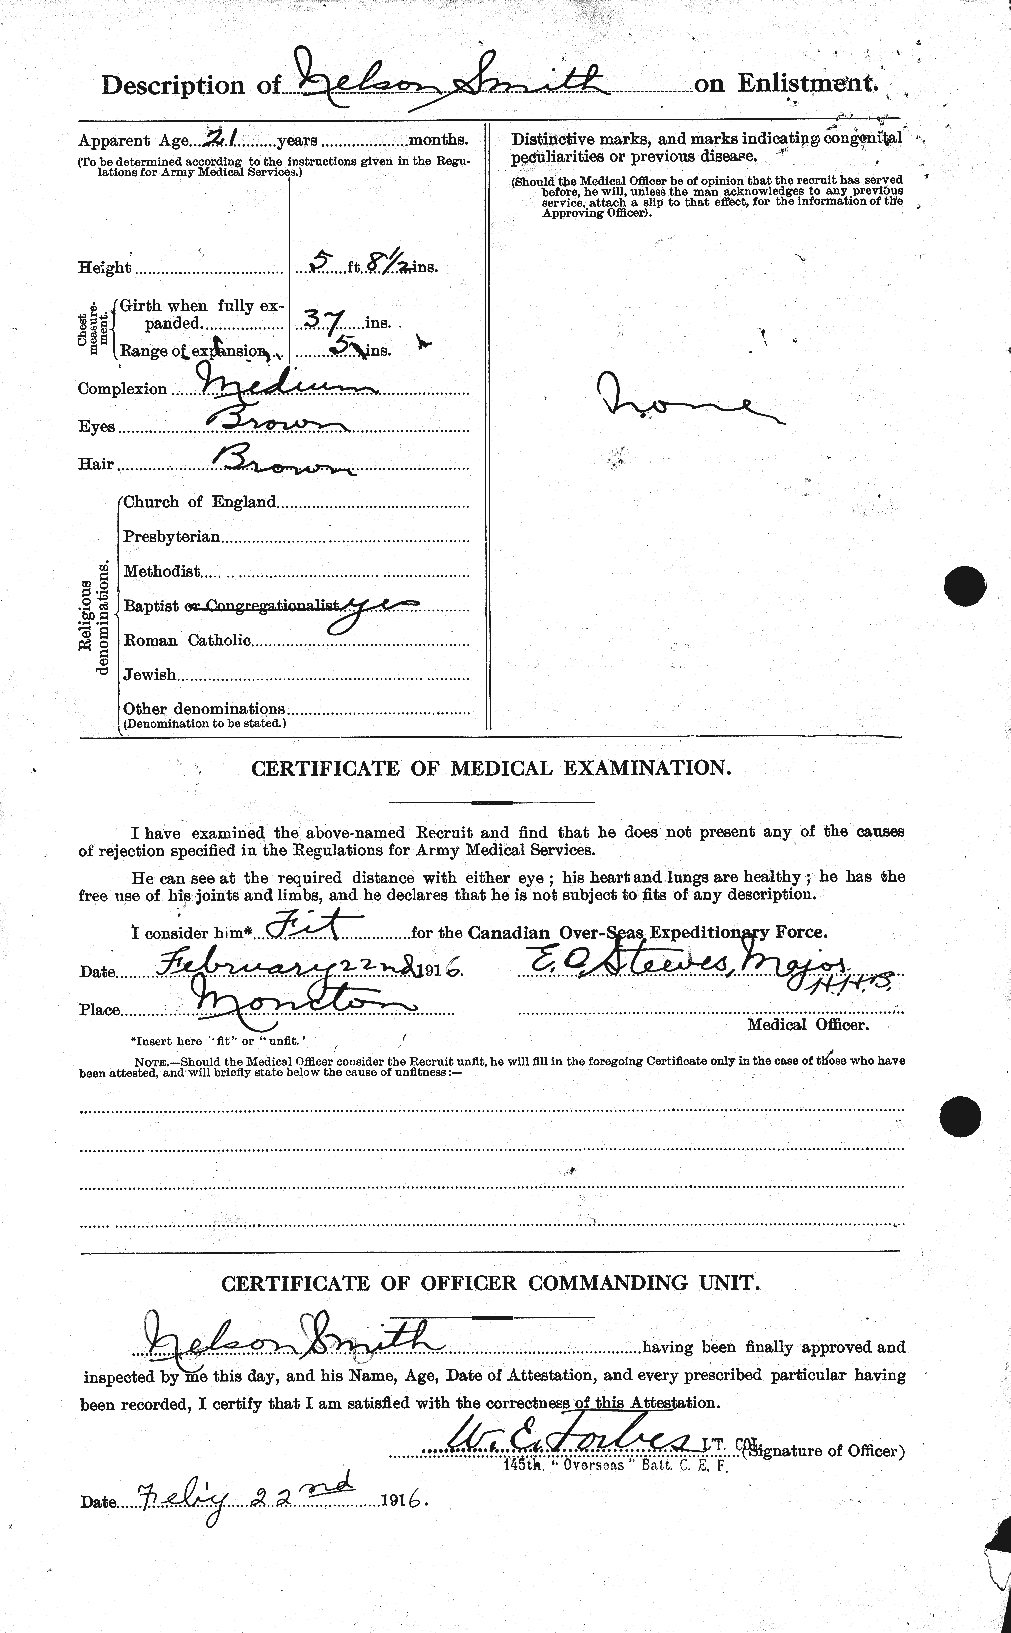 Personnel Records of the First World War - CEF 104172b